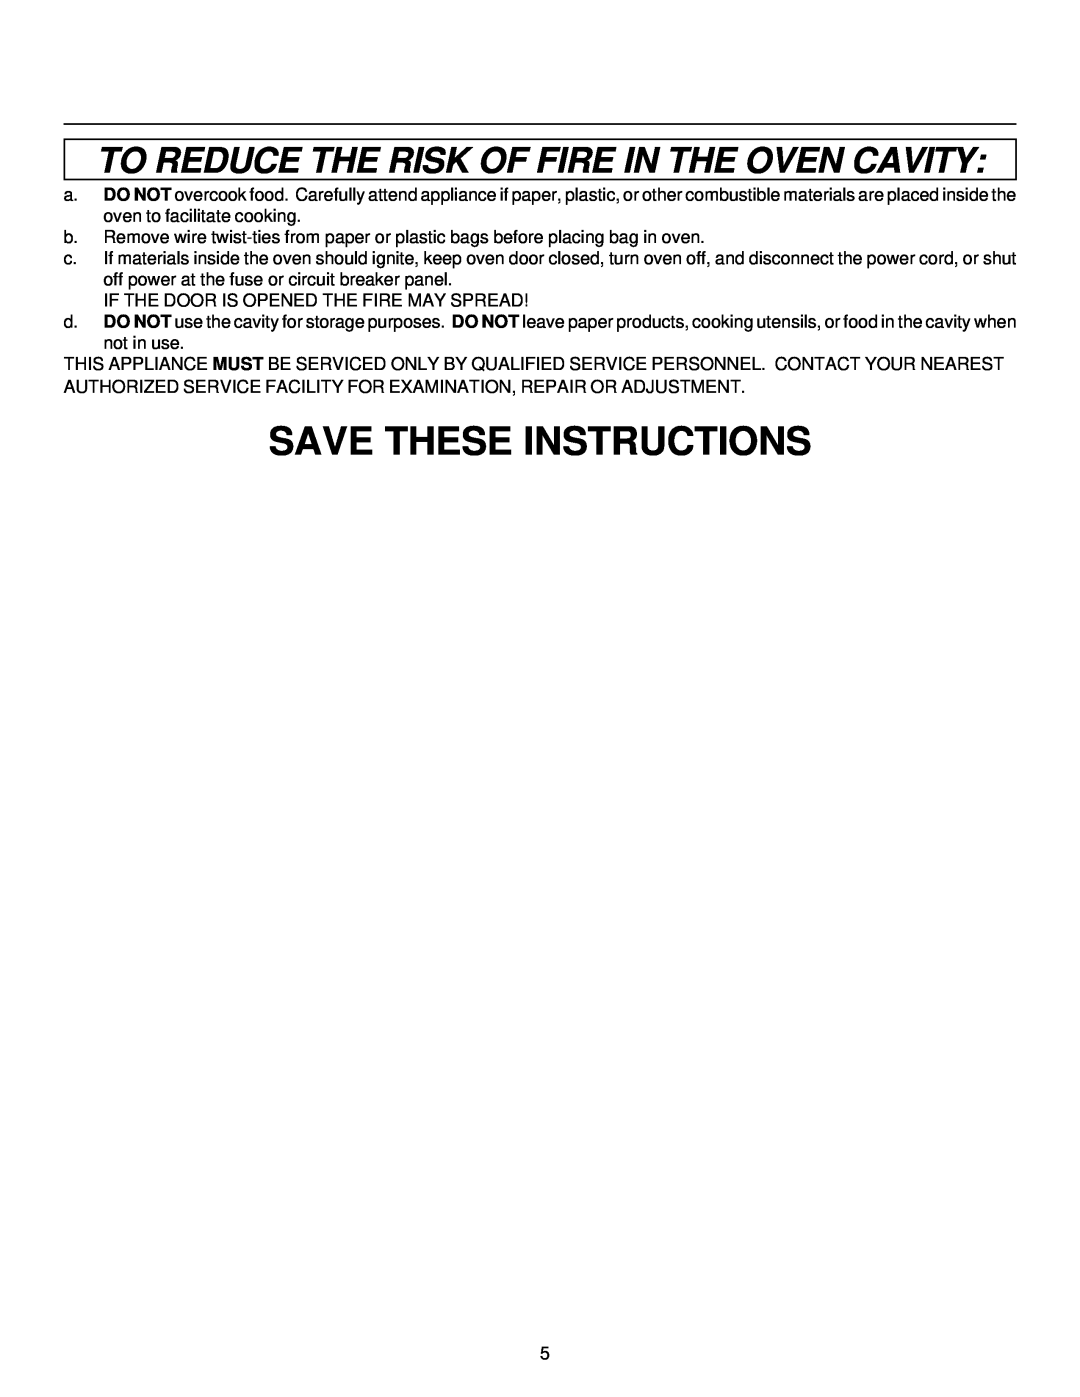 Amana MH220E, MVH220W manual Save These Instructions, To Reduce The Risk Of Fire In The Oven Cavity 